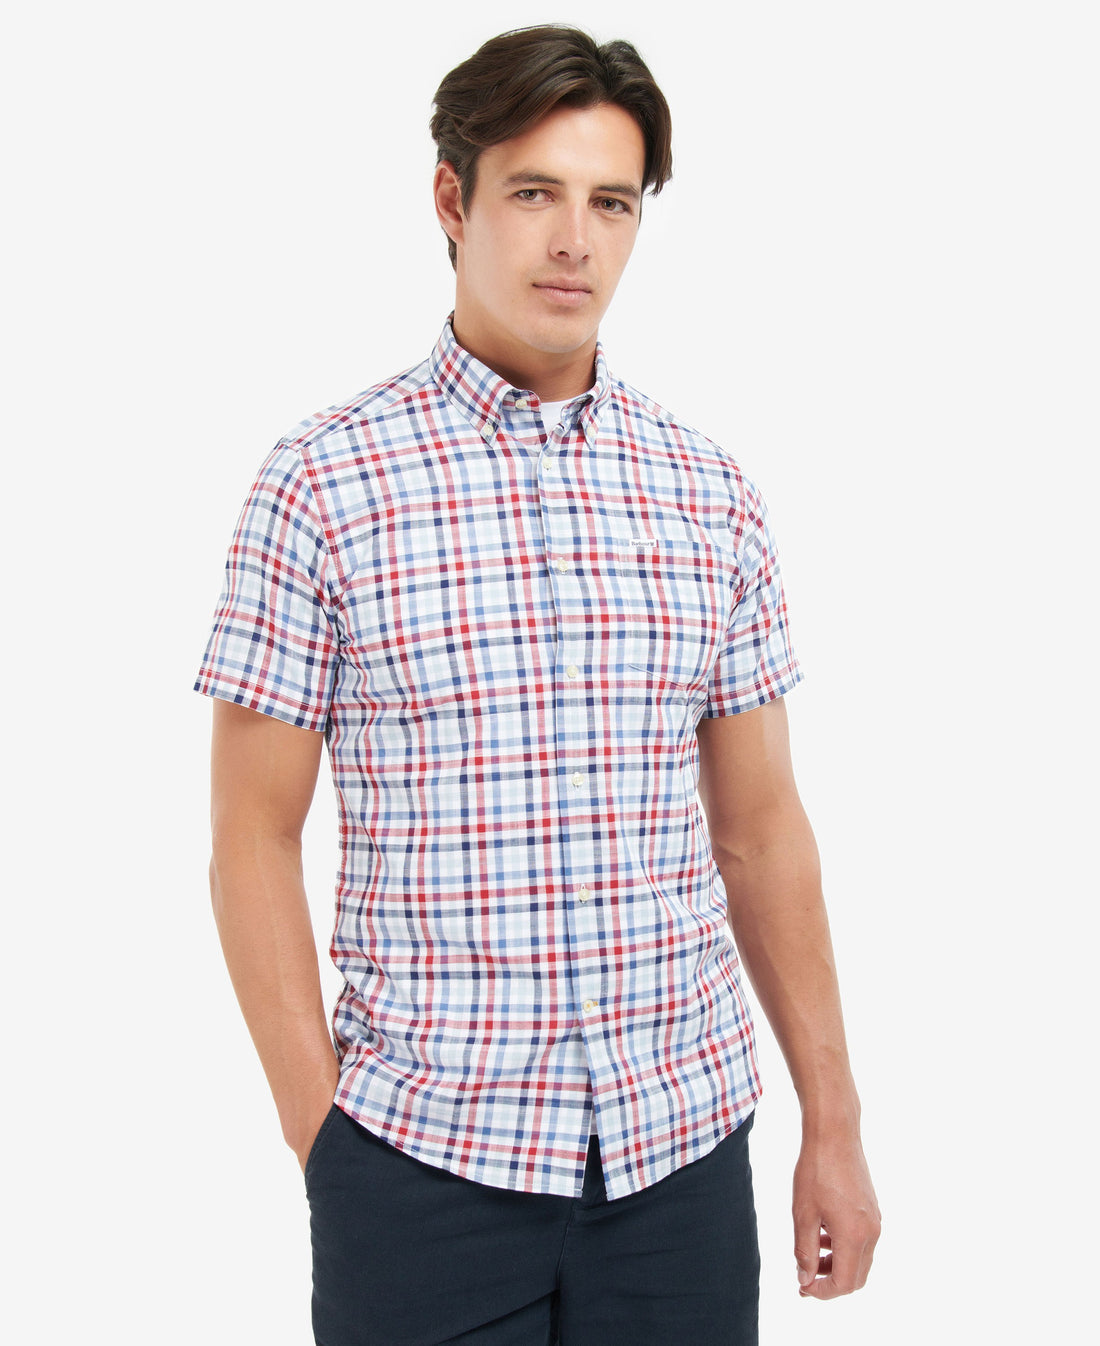 Kinson Tailored Shirt - Classic Red